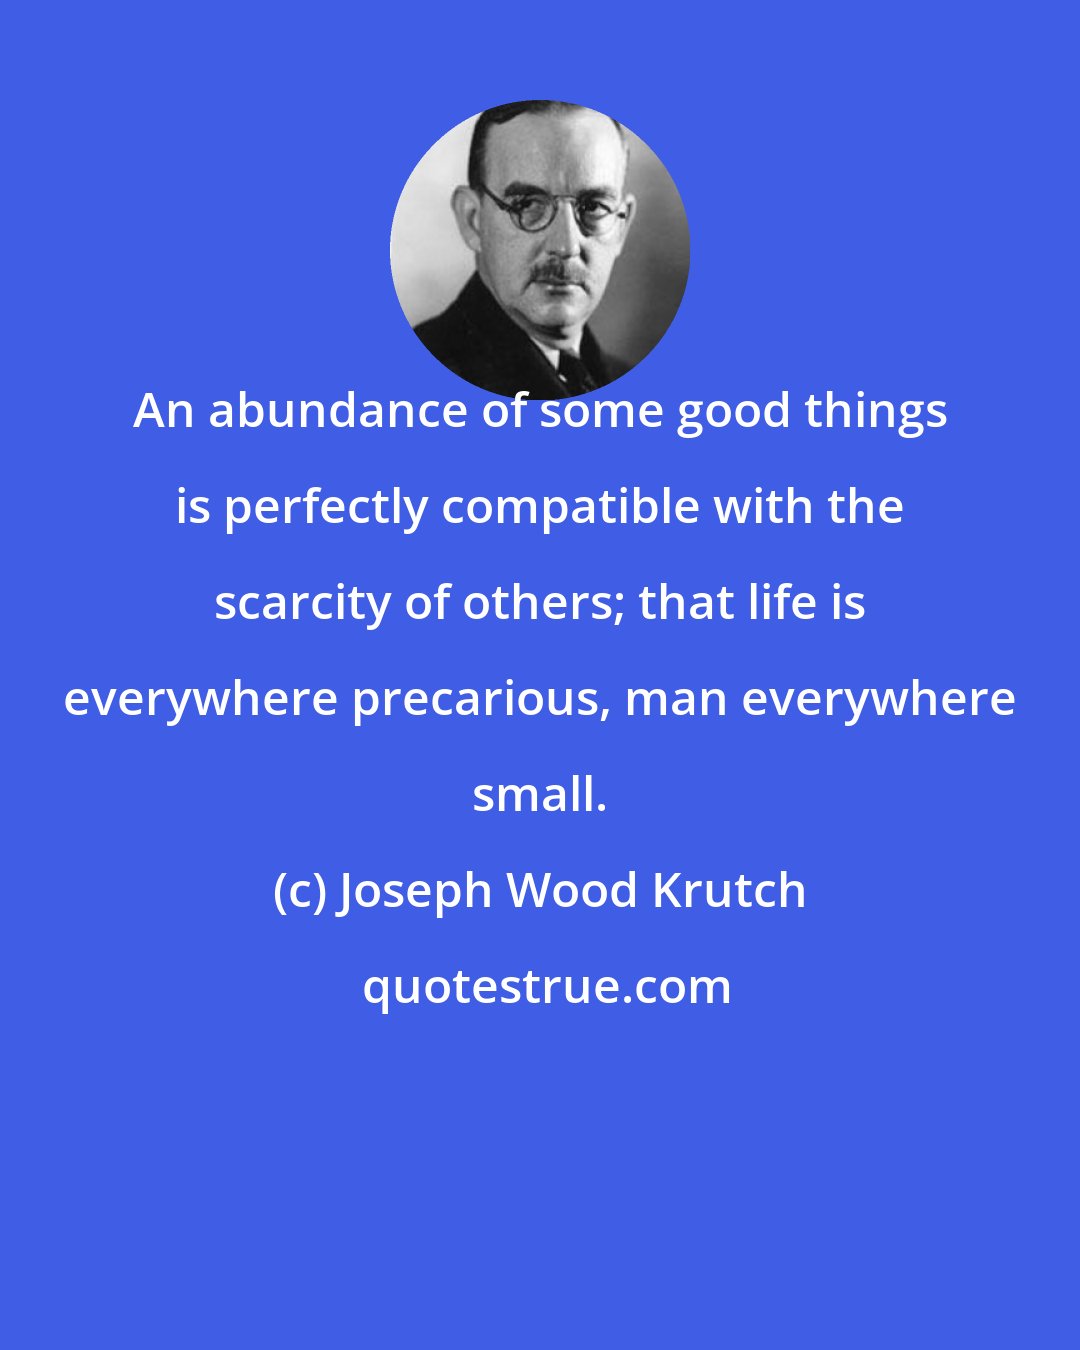 Joseph Wood Krutch: An abundance of some good things is perfectly compatible with the scarcity of others; that life is everywhere precarious, man everywhere small.